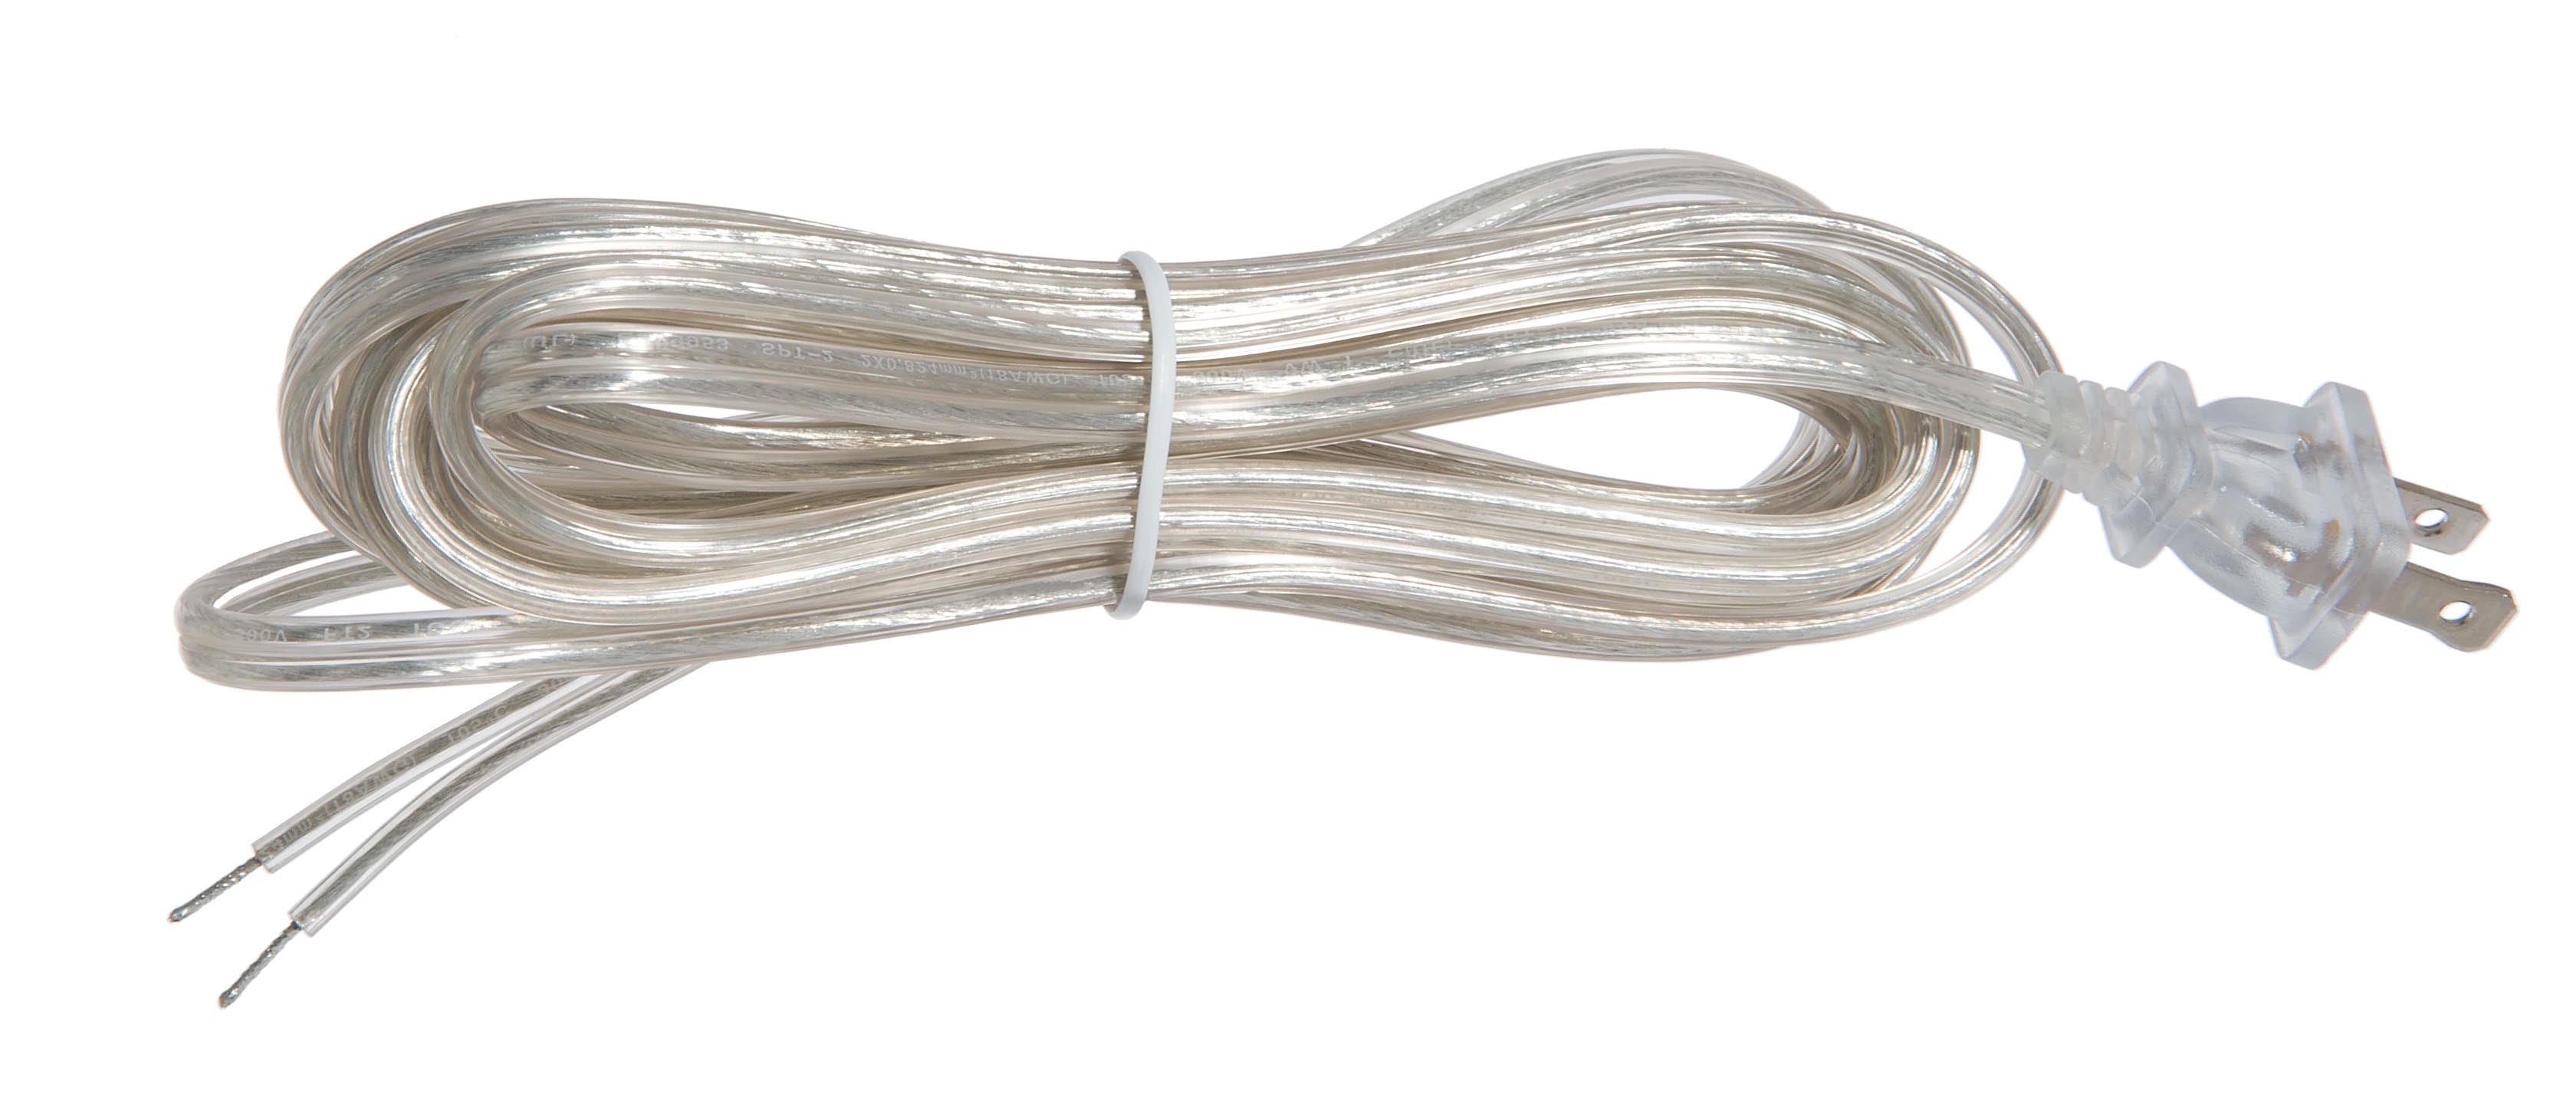 18/2 SPT-2 Clear Silver Plastic Covered Cord Set, Tinned, Choice of Length  (46813NL) - Antique Lamp Supply - Quality Lamp Parts Since 1952